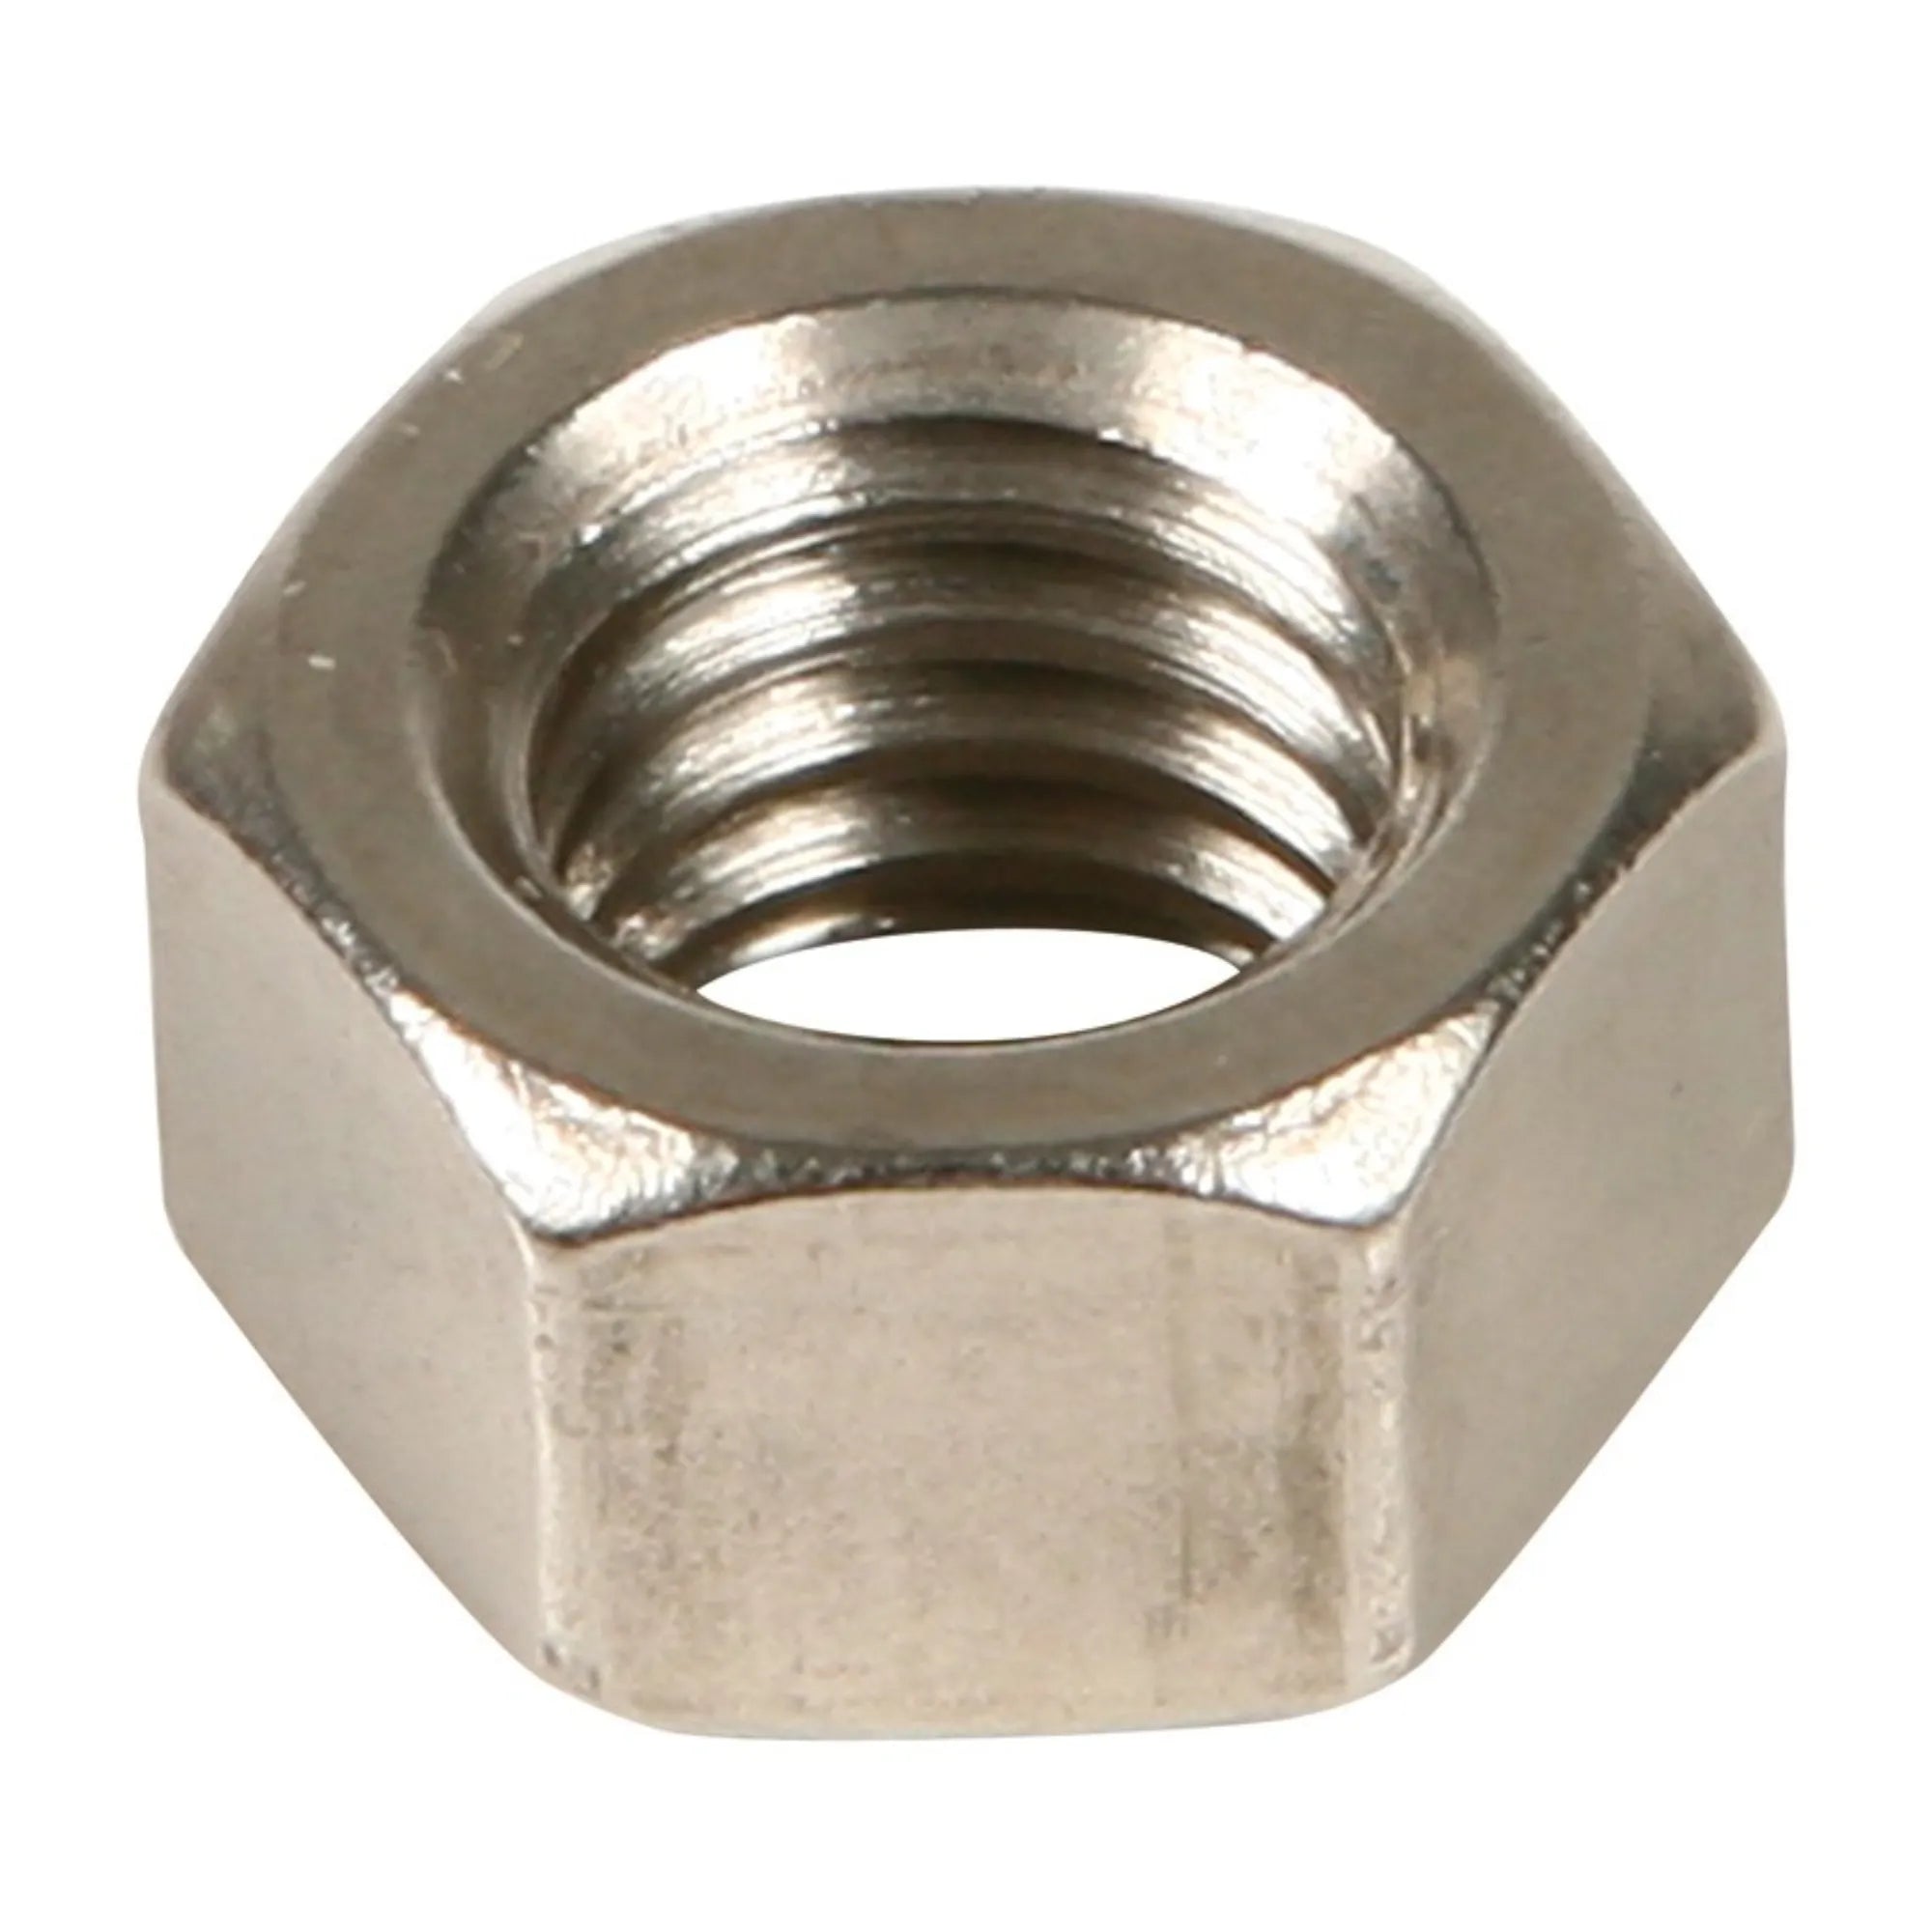 A4 S/S Hexagon Full Nuts